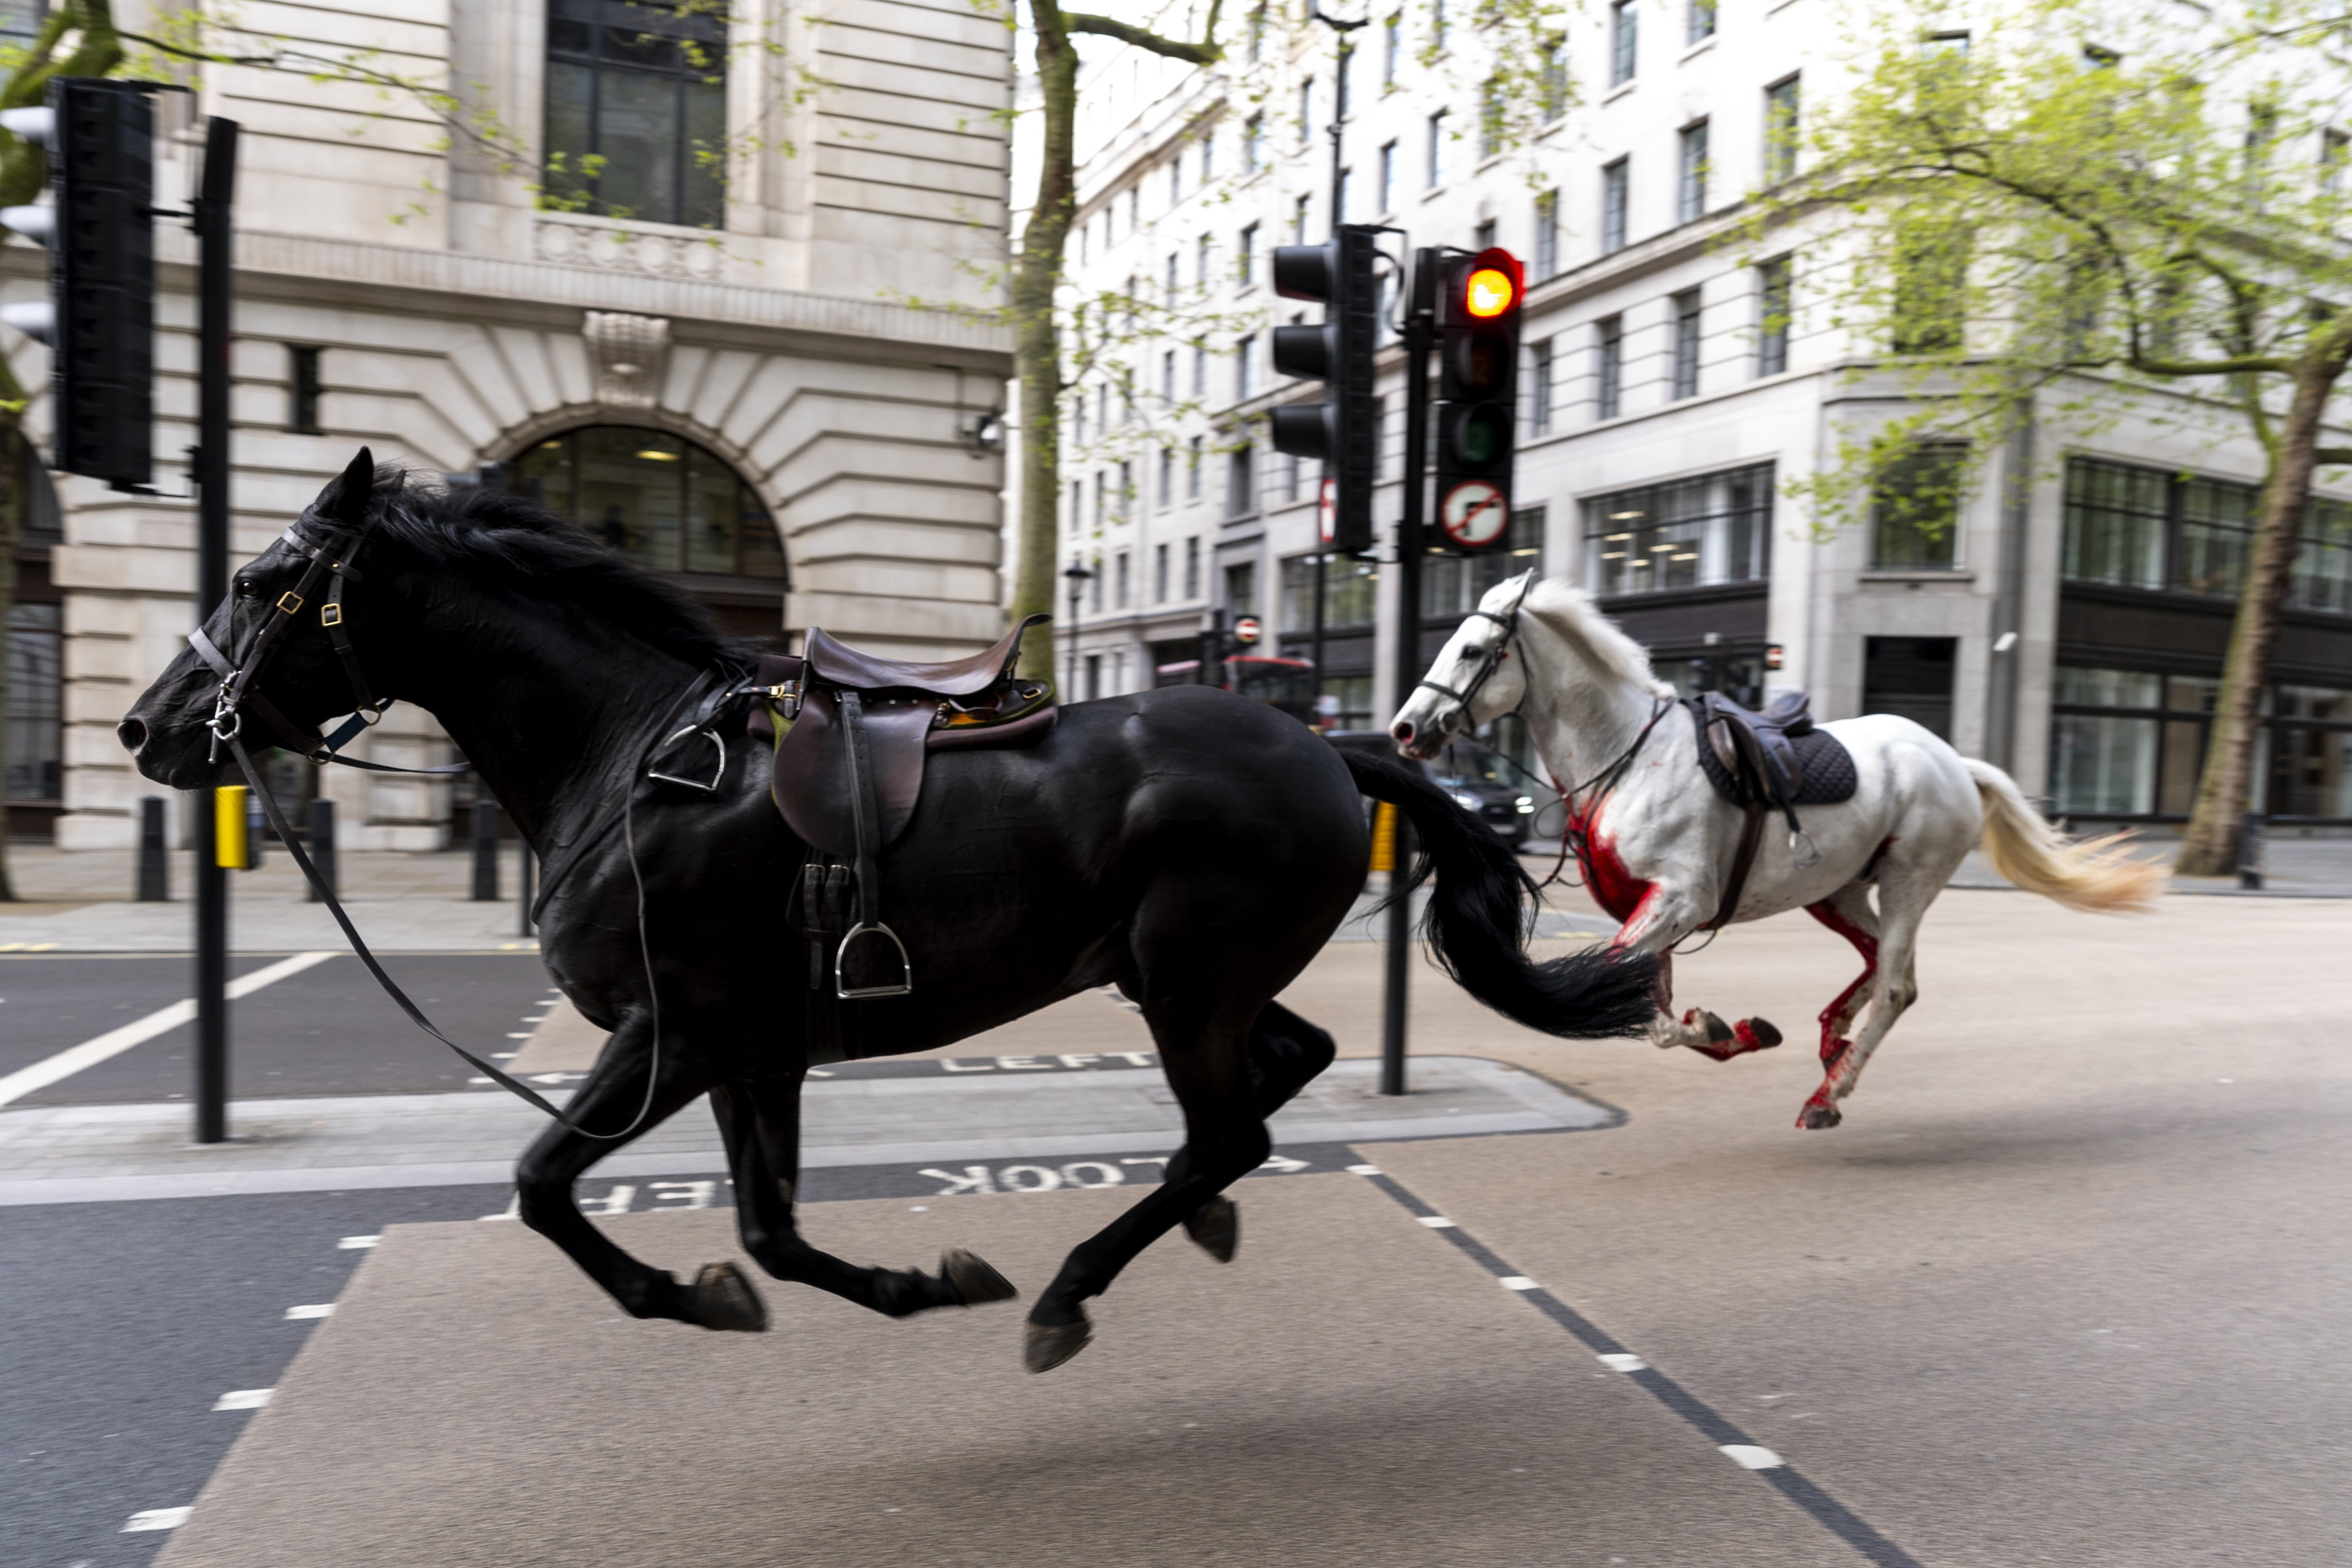 Two horses on the loose bolt through the streets of London. Photo: dpa